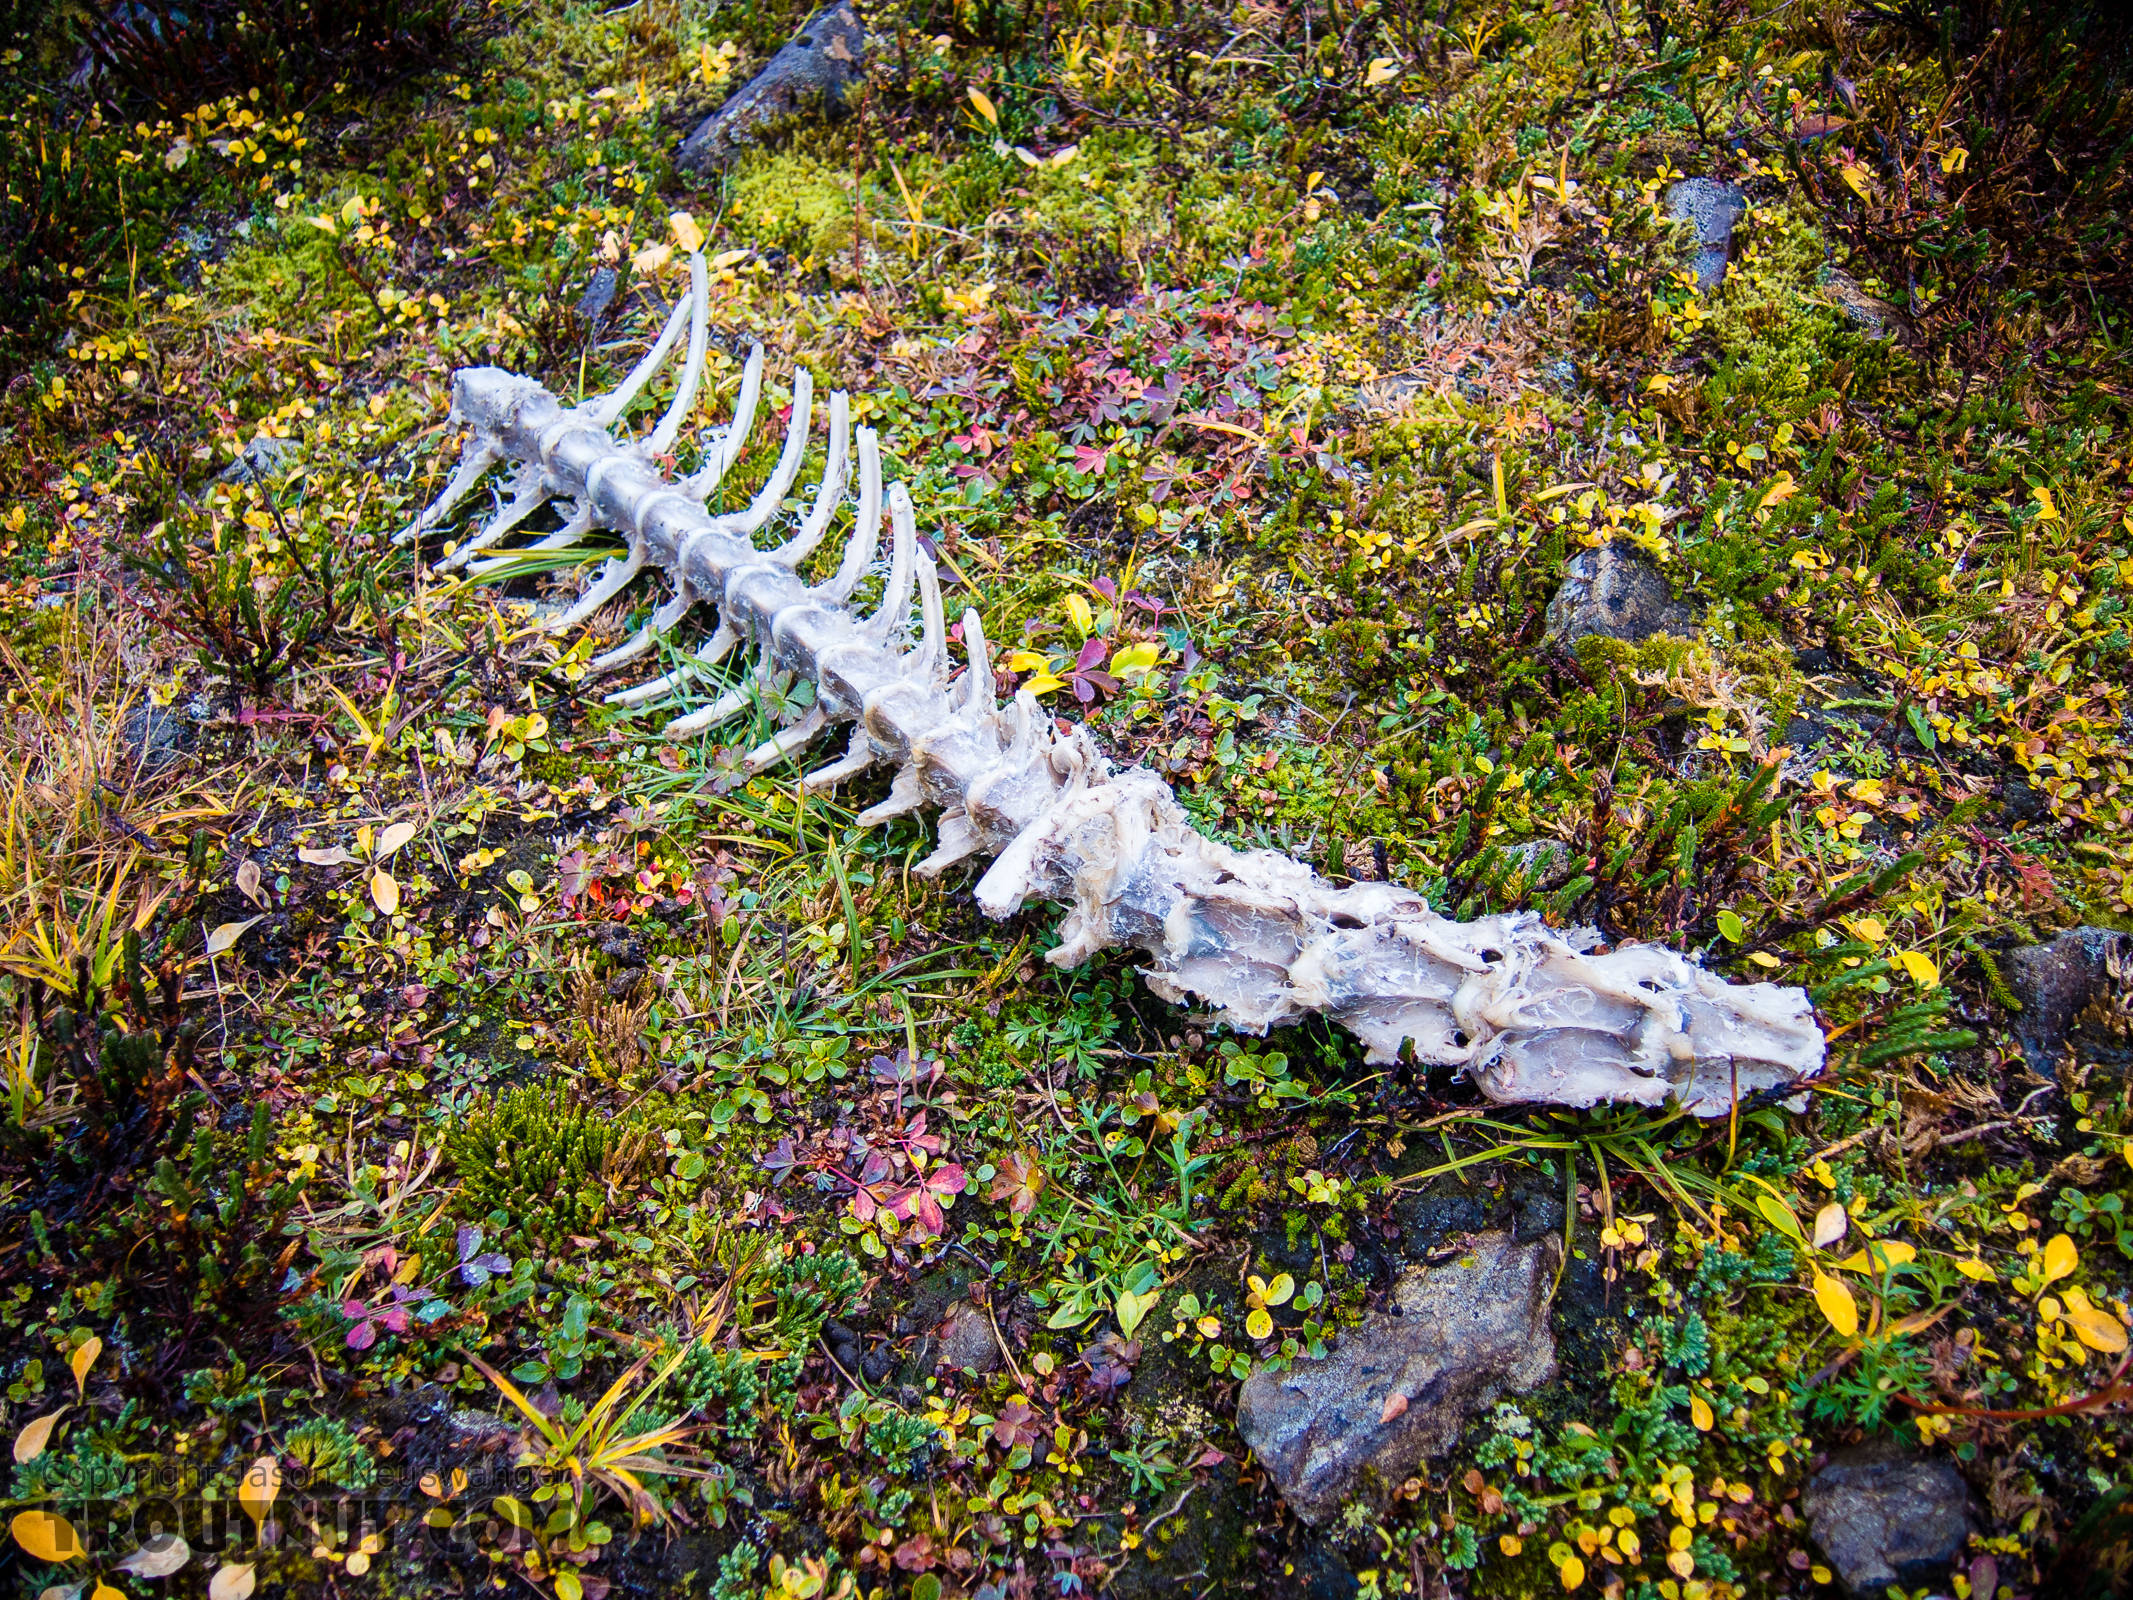 Caribou backbone. The sawed-off ribs on this partial caribou skeleton mean it was killed by a hunter. Given the location, it might be my bull from last year. It's nice to see how quickly the tundra animals made use of everything that remained. From Clearwater Mountains in Alaska.